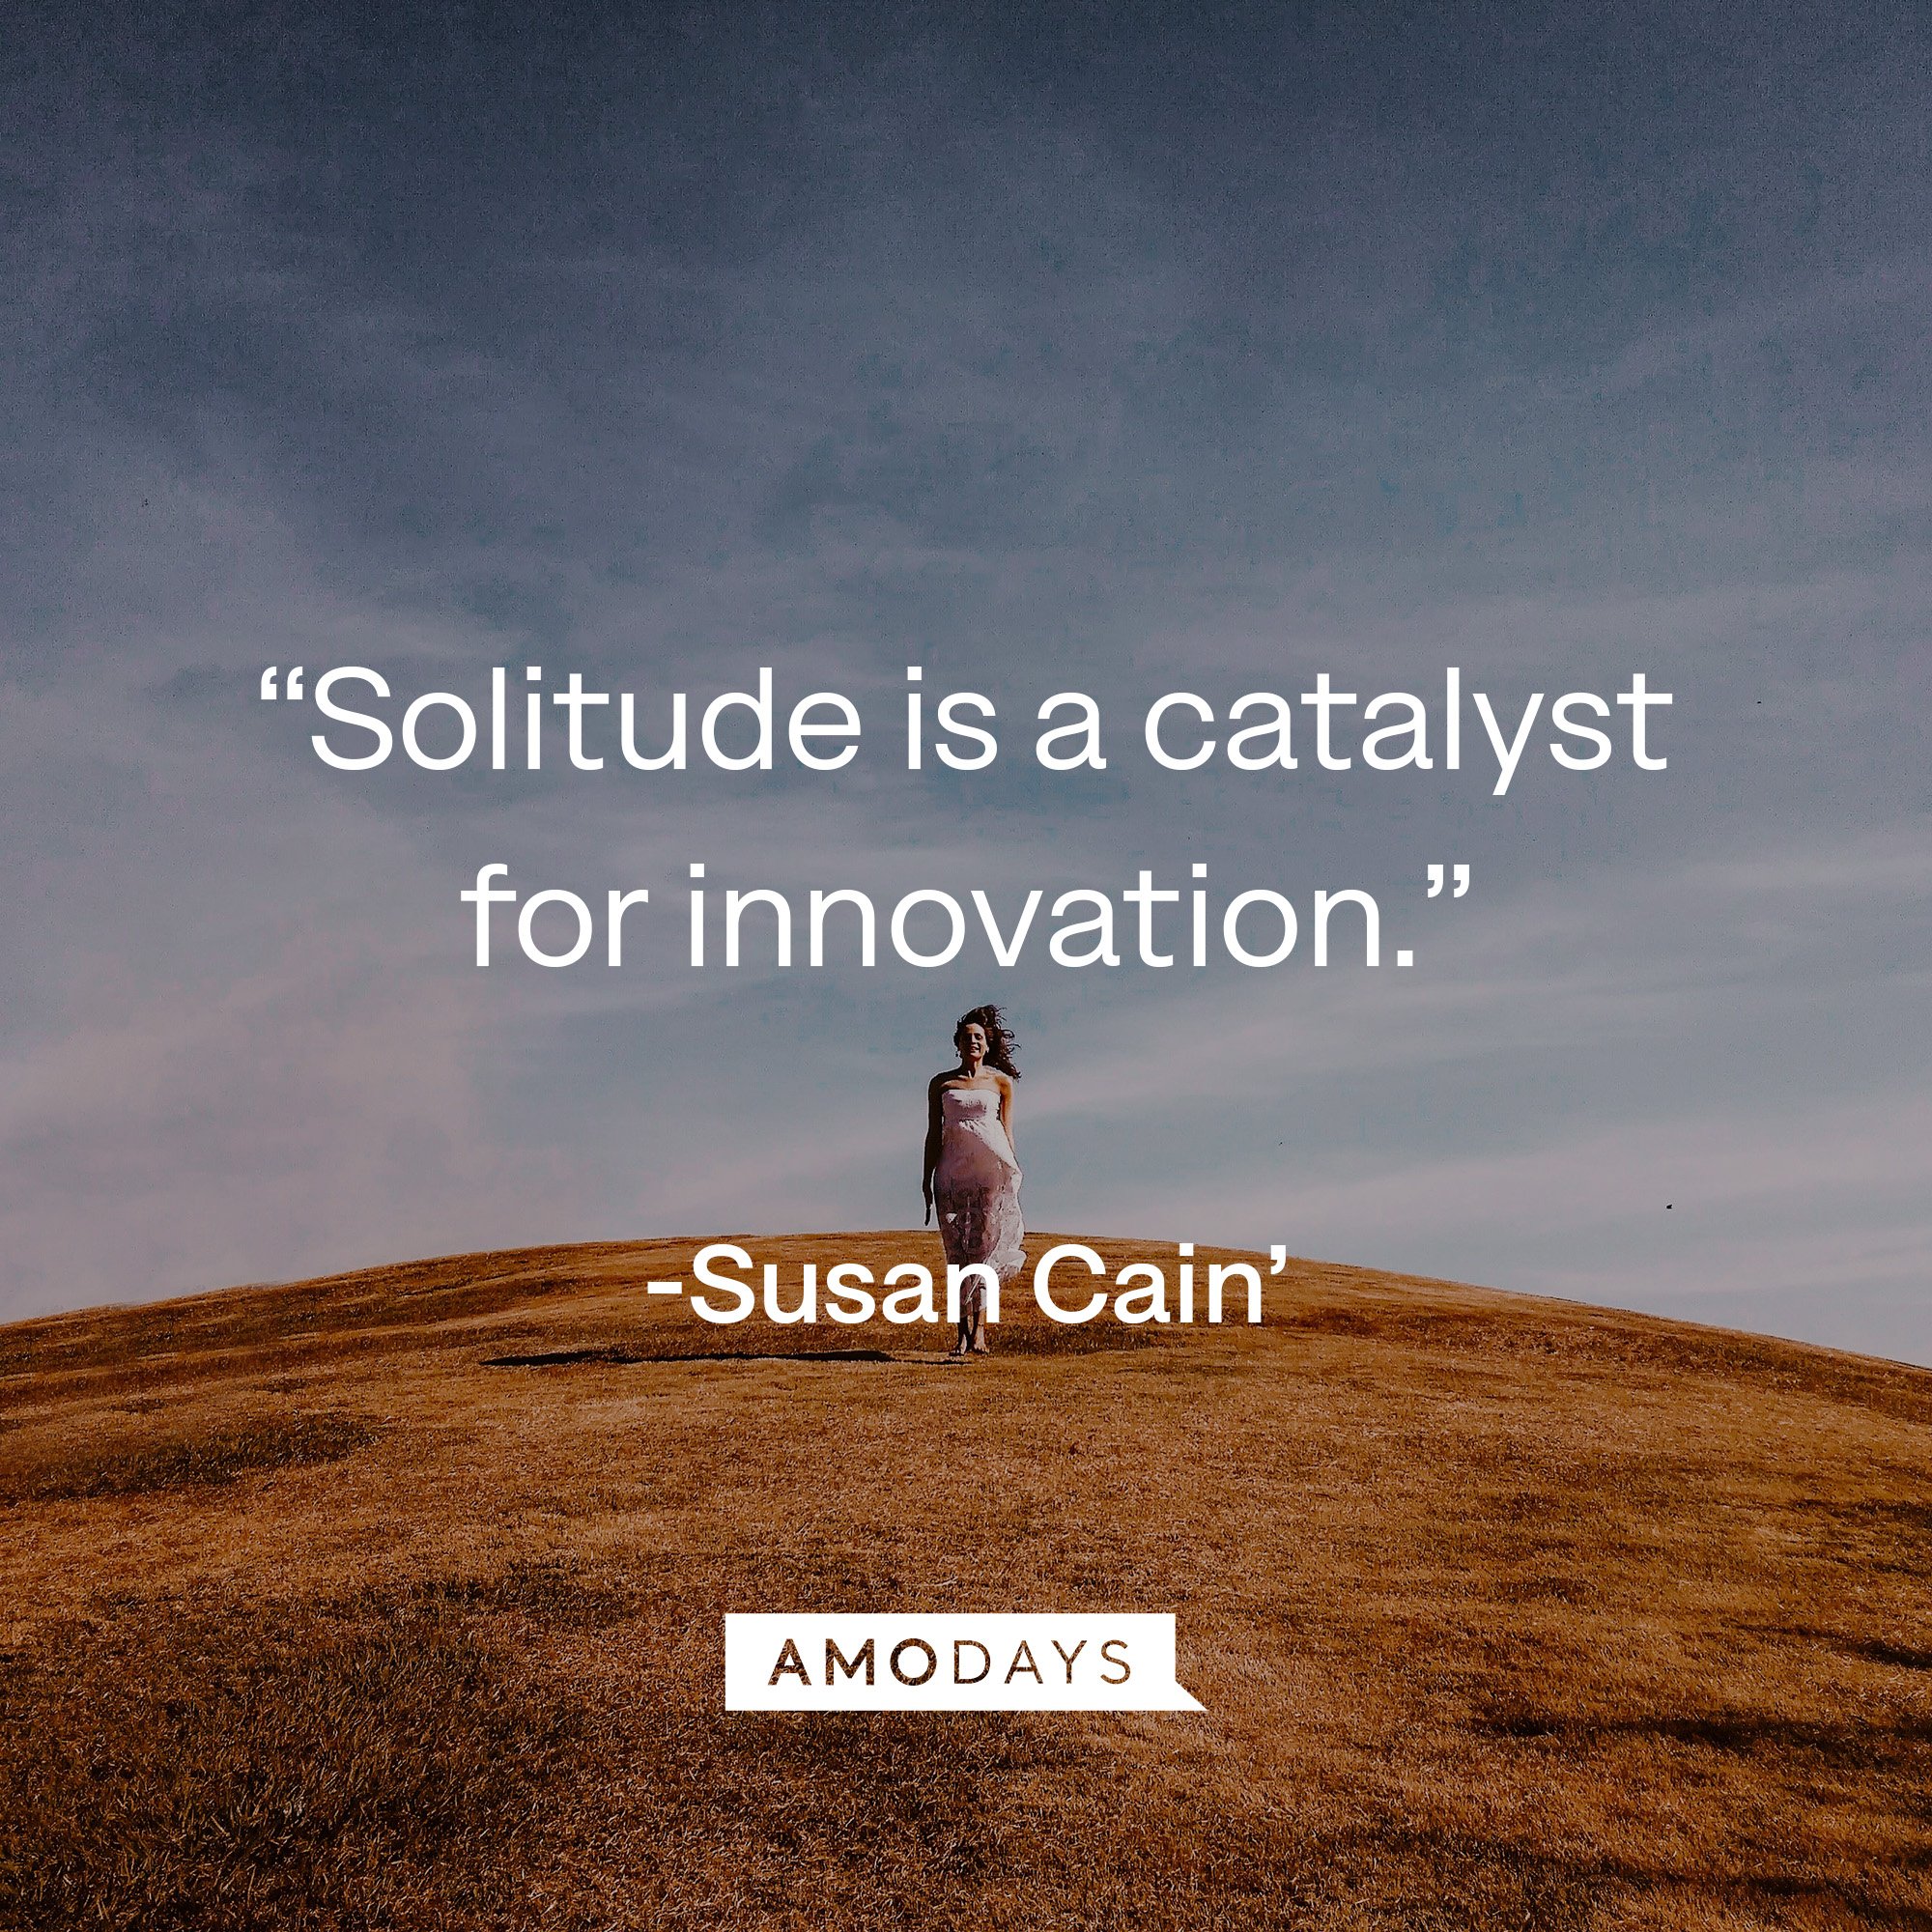 Susan Cain’s quote: Solitude is a catalyst for innovation.” | Image: Amodays